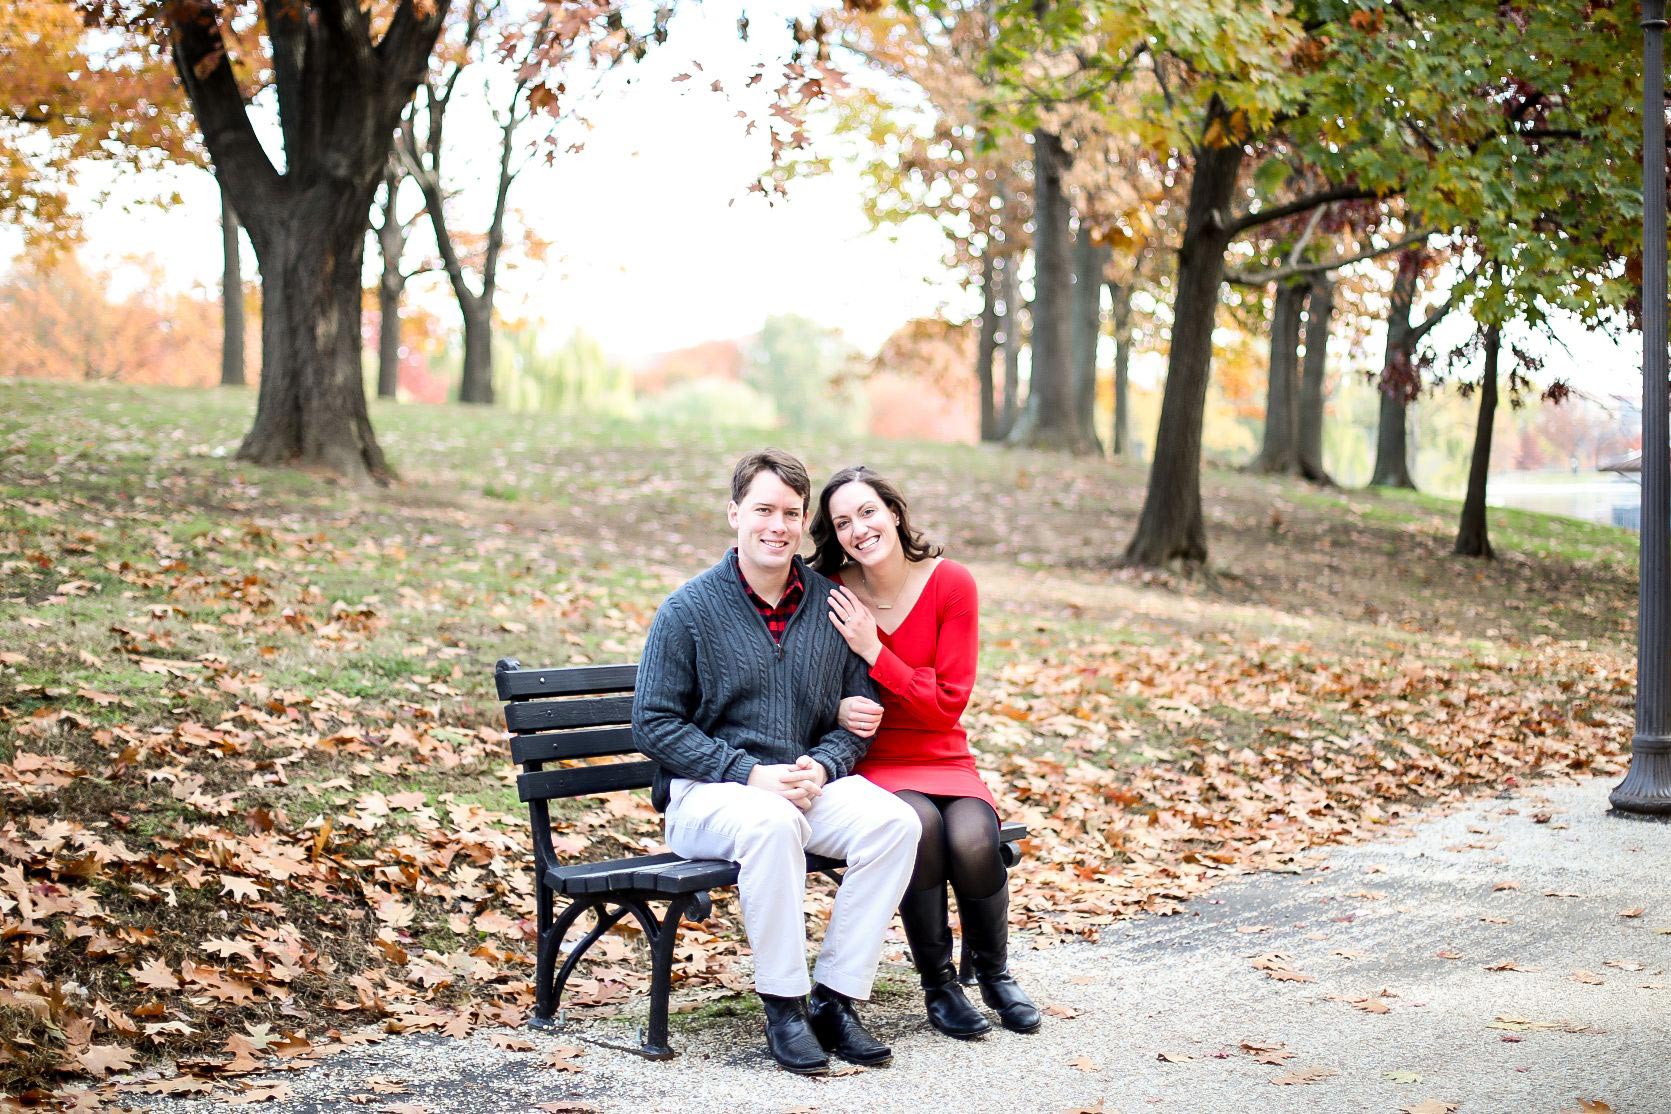 Joe Riley and his wife Rachel sitting on a bench with fallen leaves posing for a picture